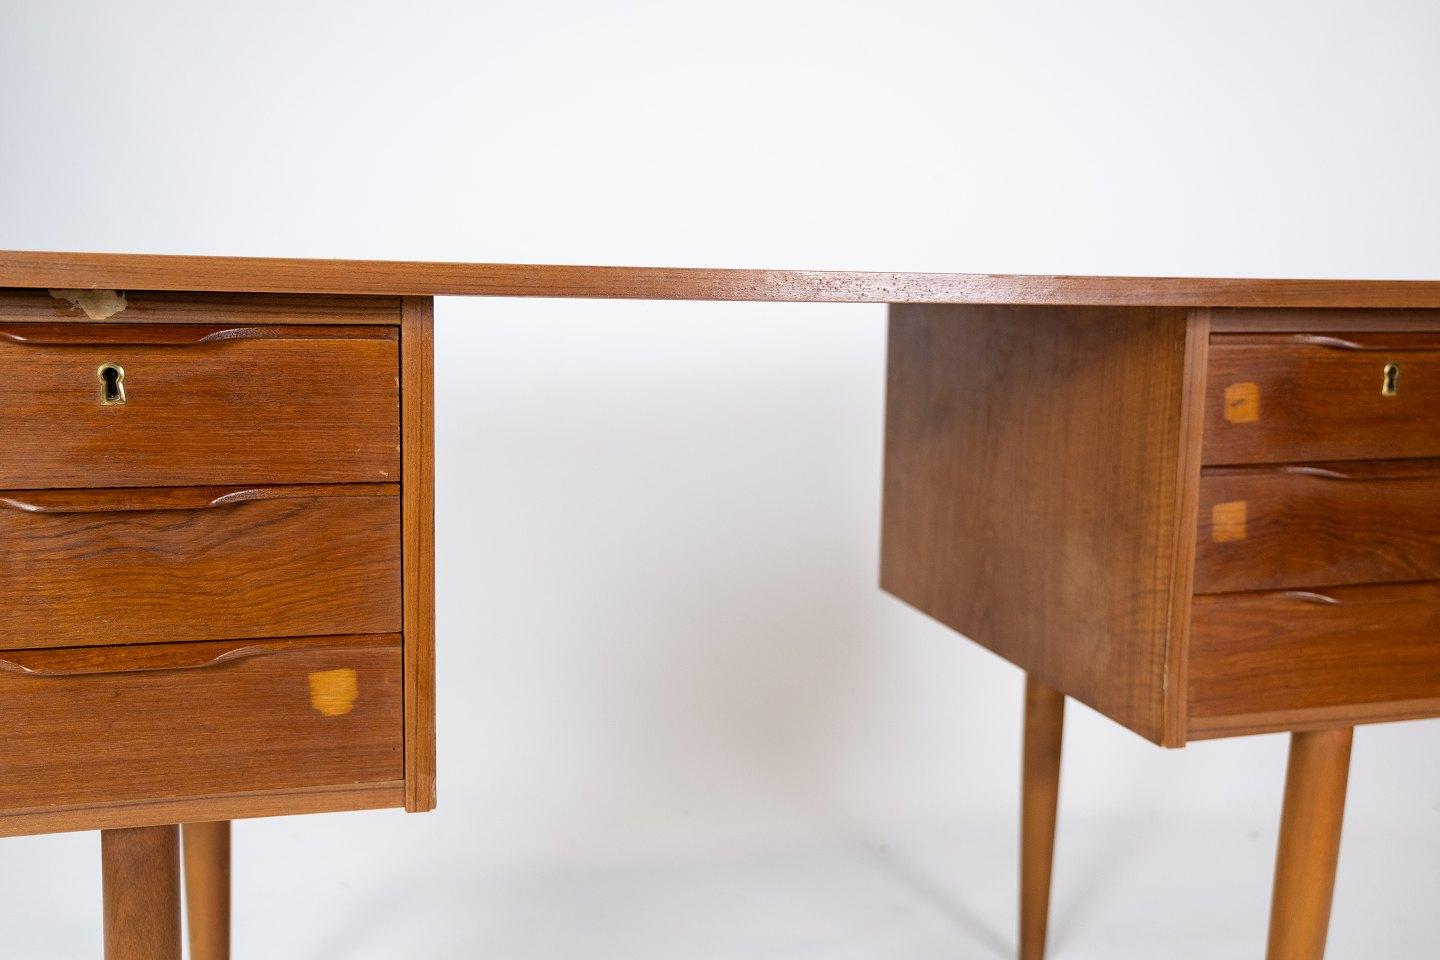 Desk Made In Teak, Danish Design From 1960s In Good Condition For Sale In Lejre, DK